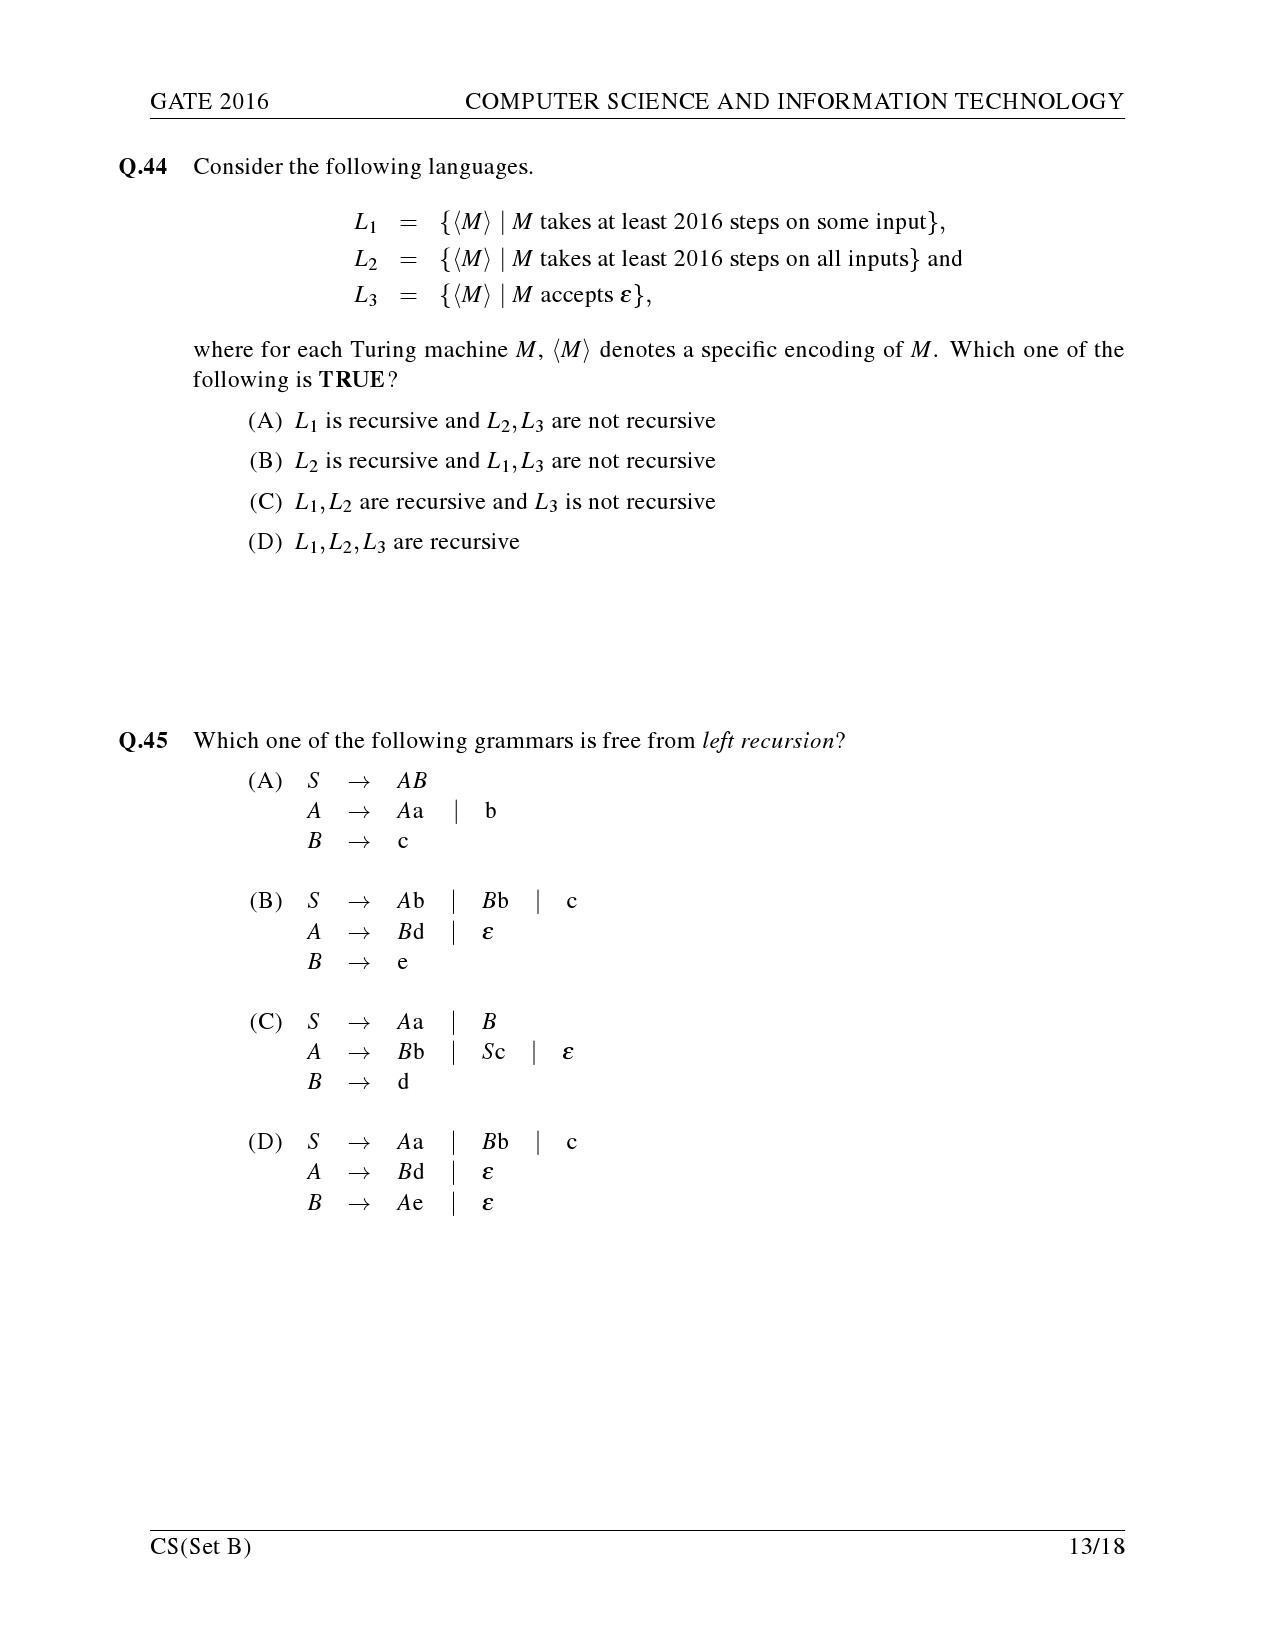 GATE Exam Question Paper 2016 Computer Science and Information Technology Set B 16